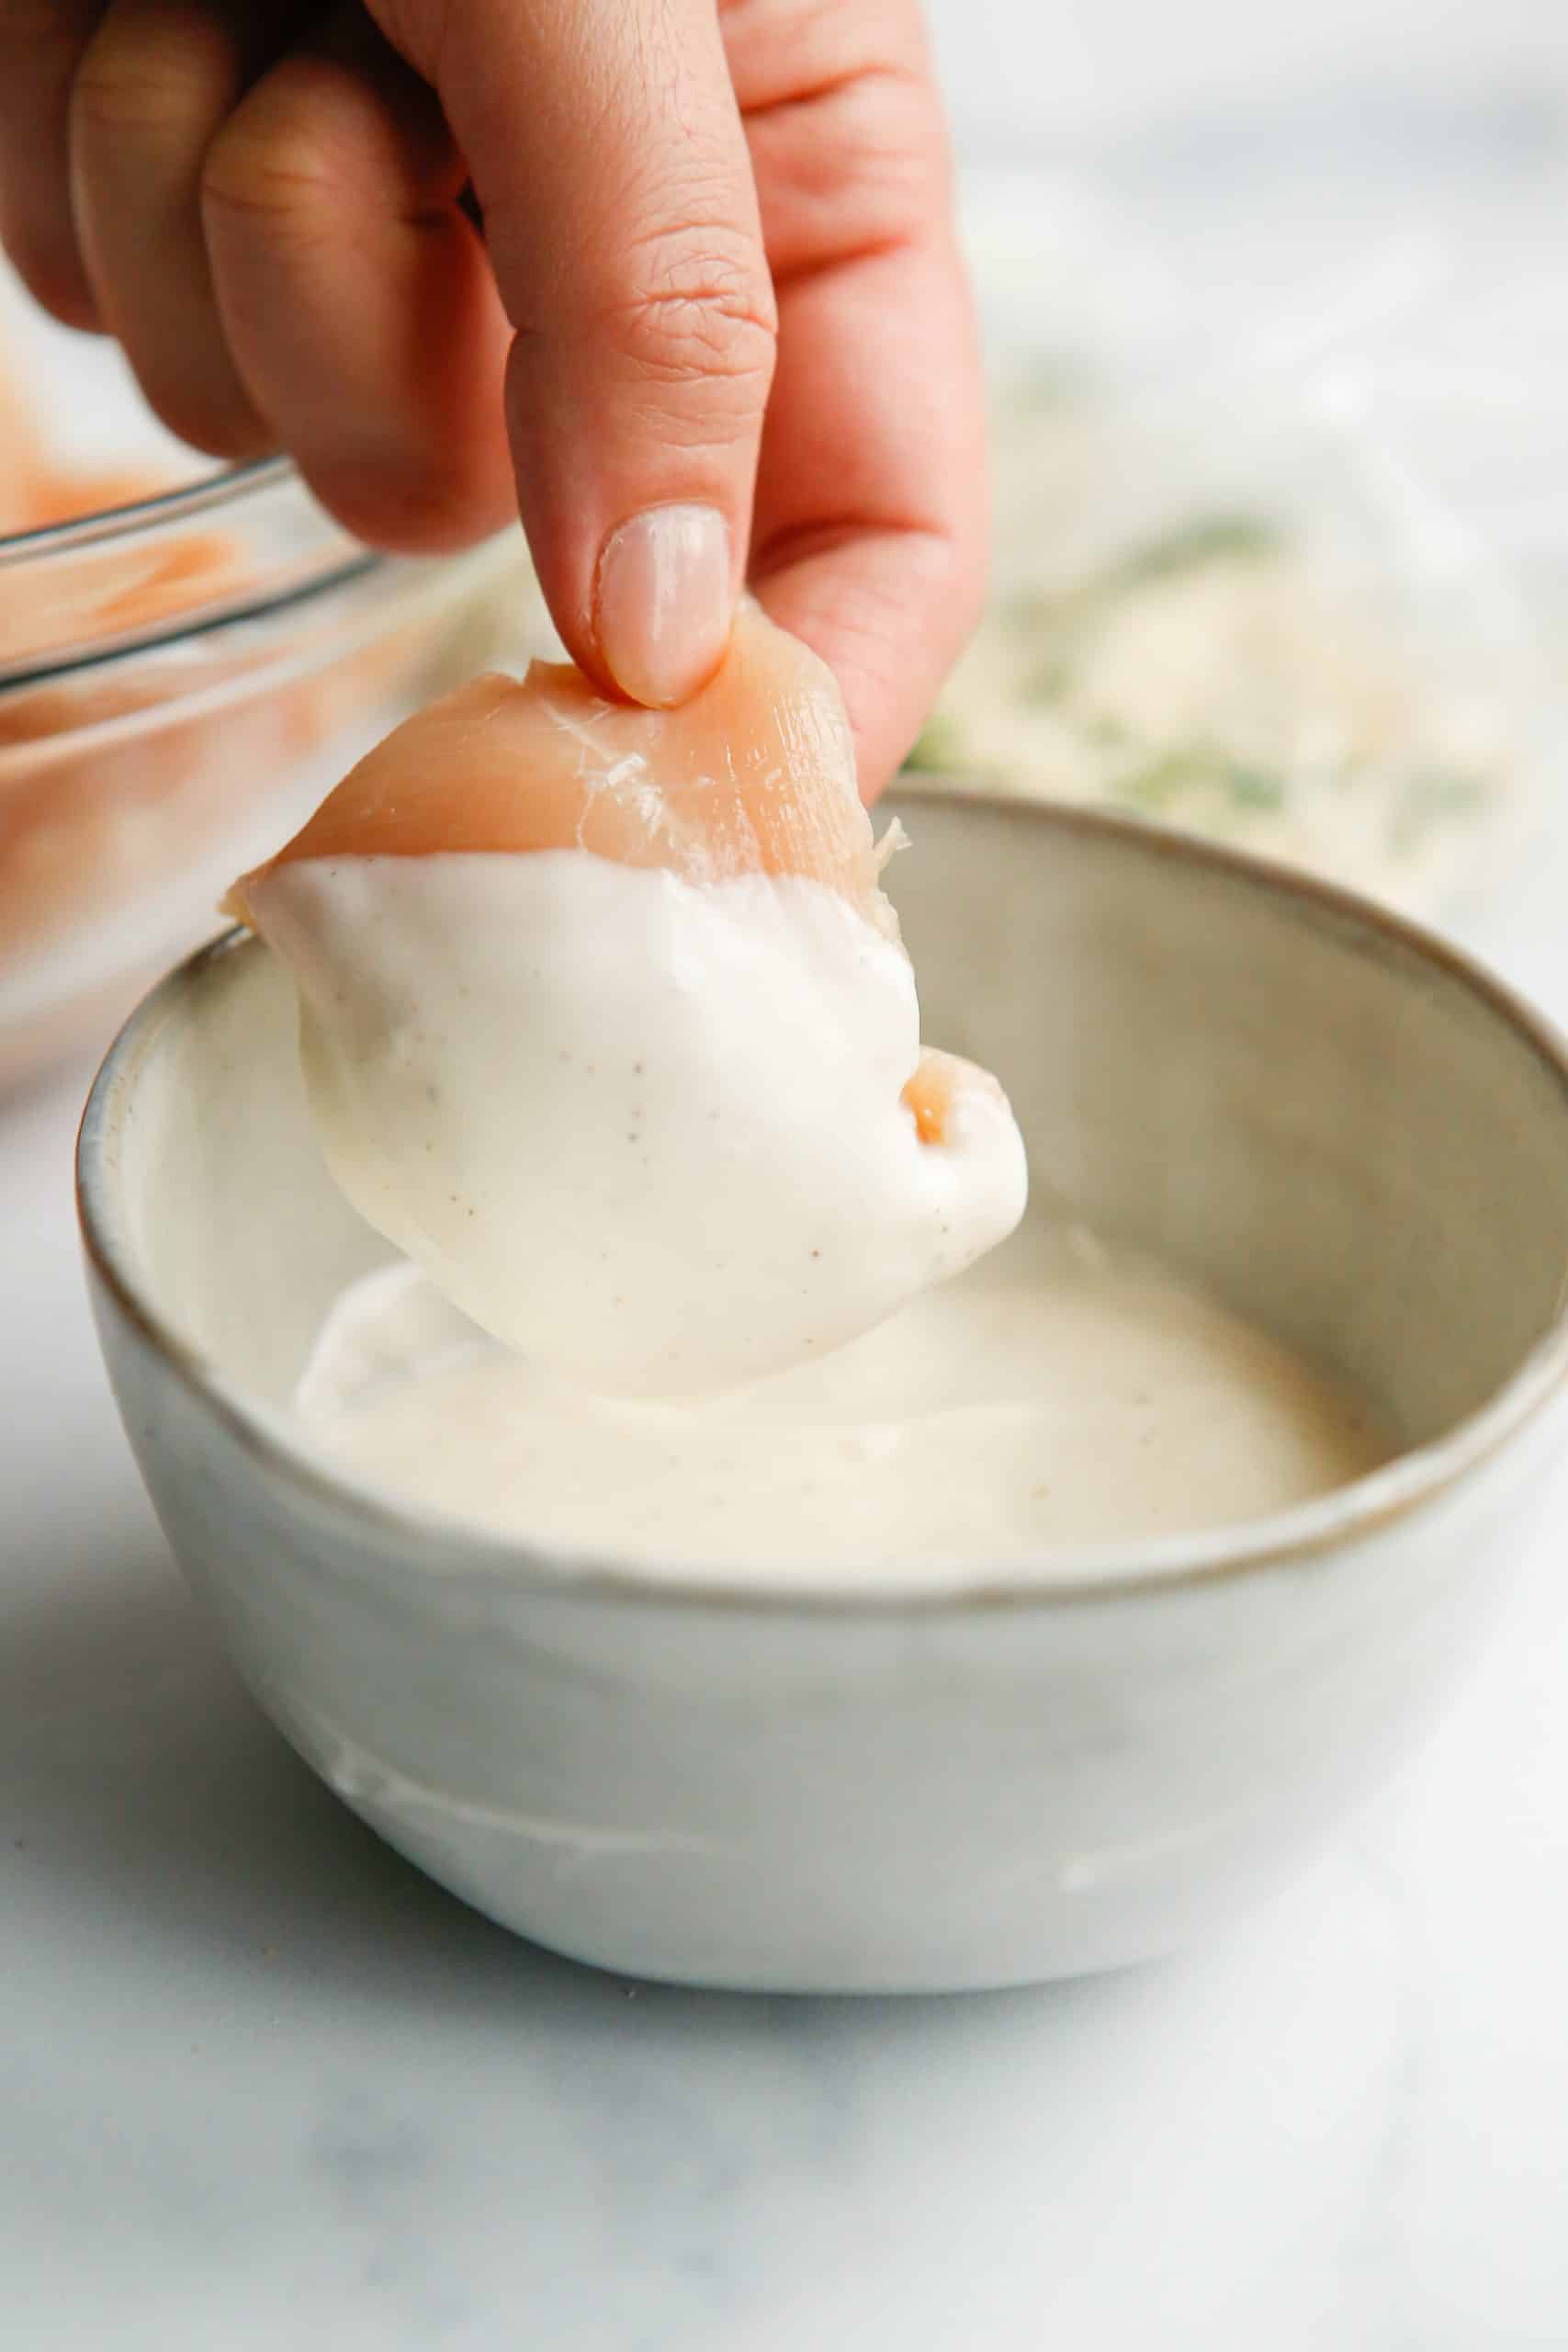 Hand dipping piece of chicken into ranch dressing in a bowl.